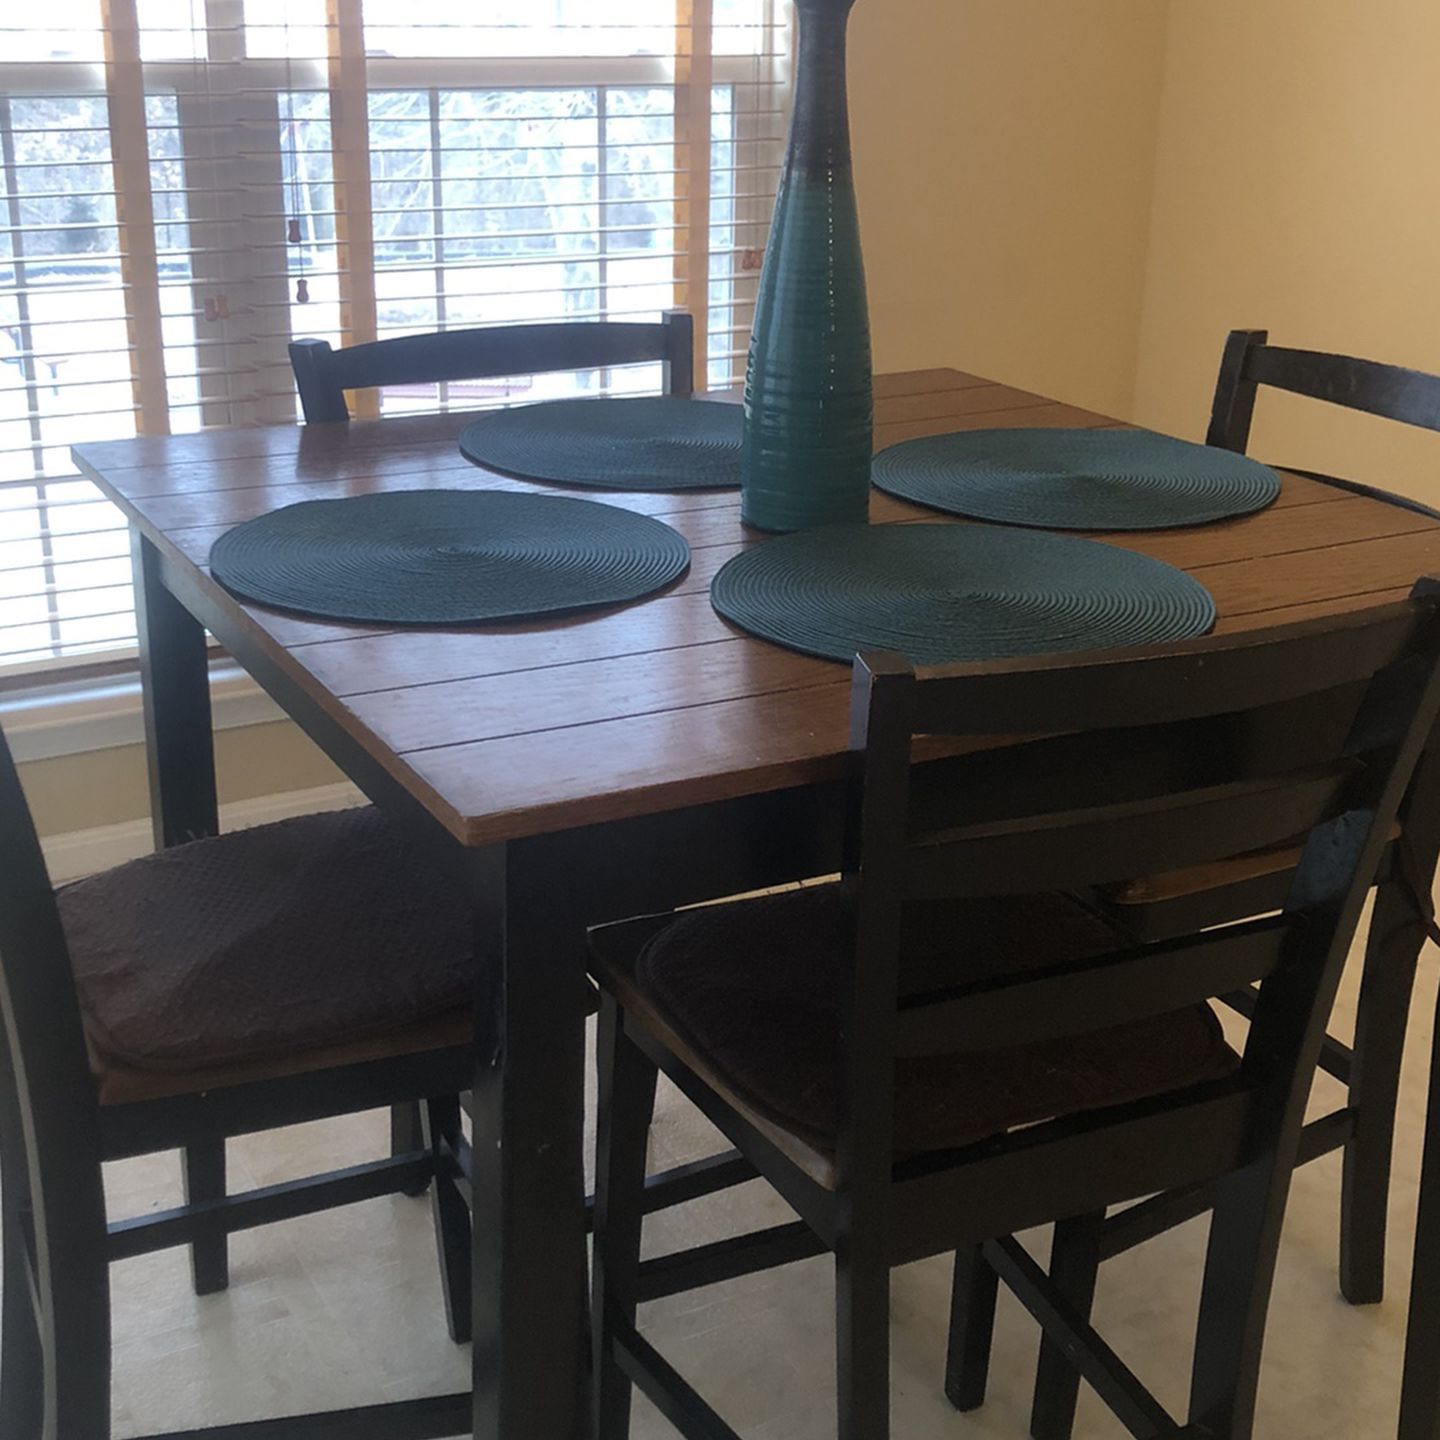 Oak Wood and Black high kitchen table with 4 chairs